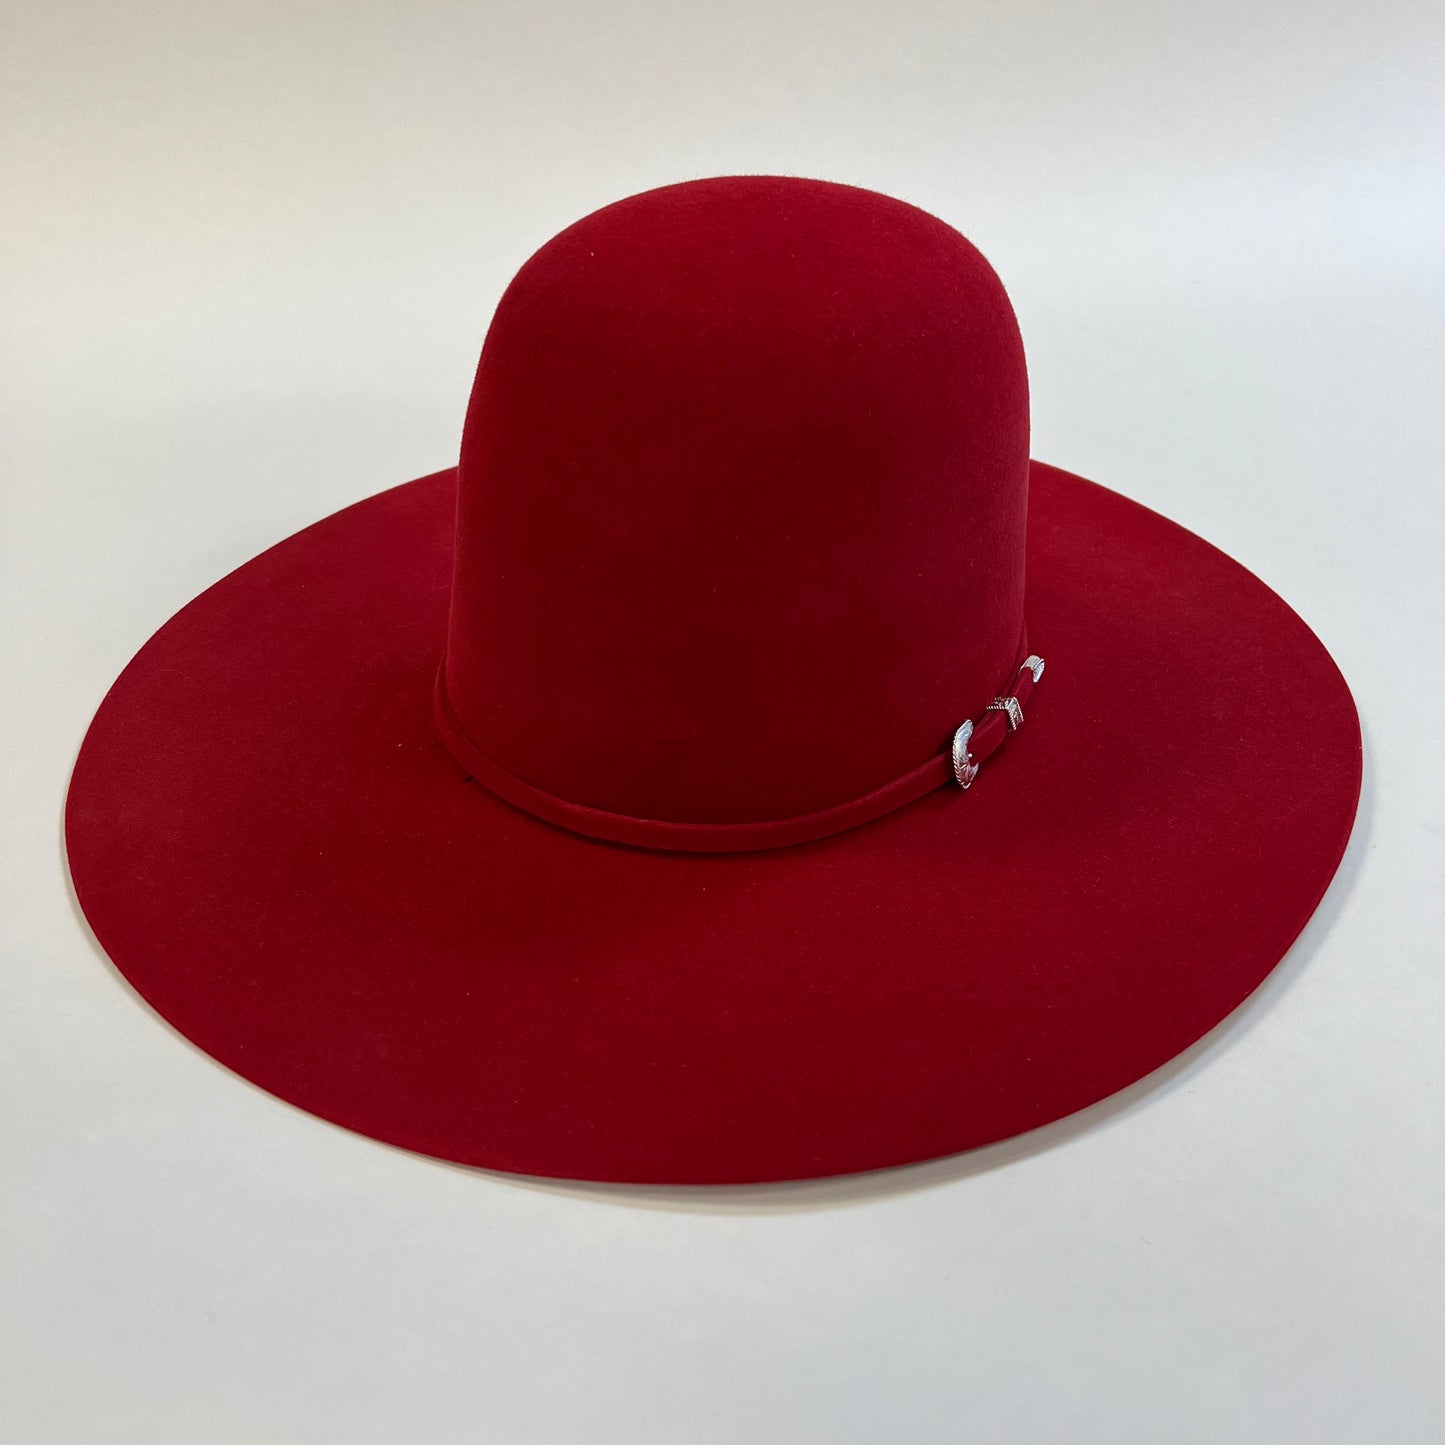 Tacchino 6X Red Felt Hat 6" Open Crown